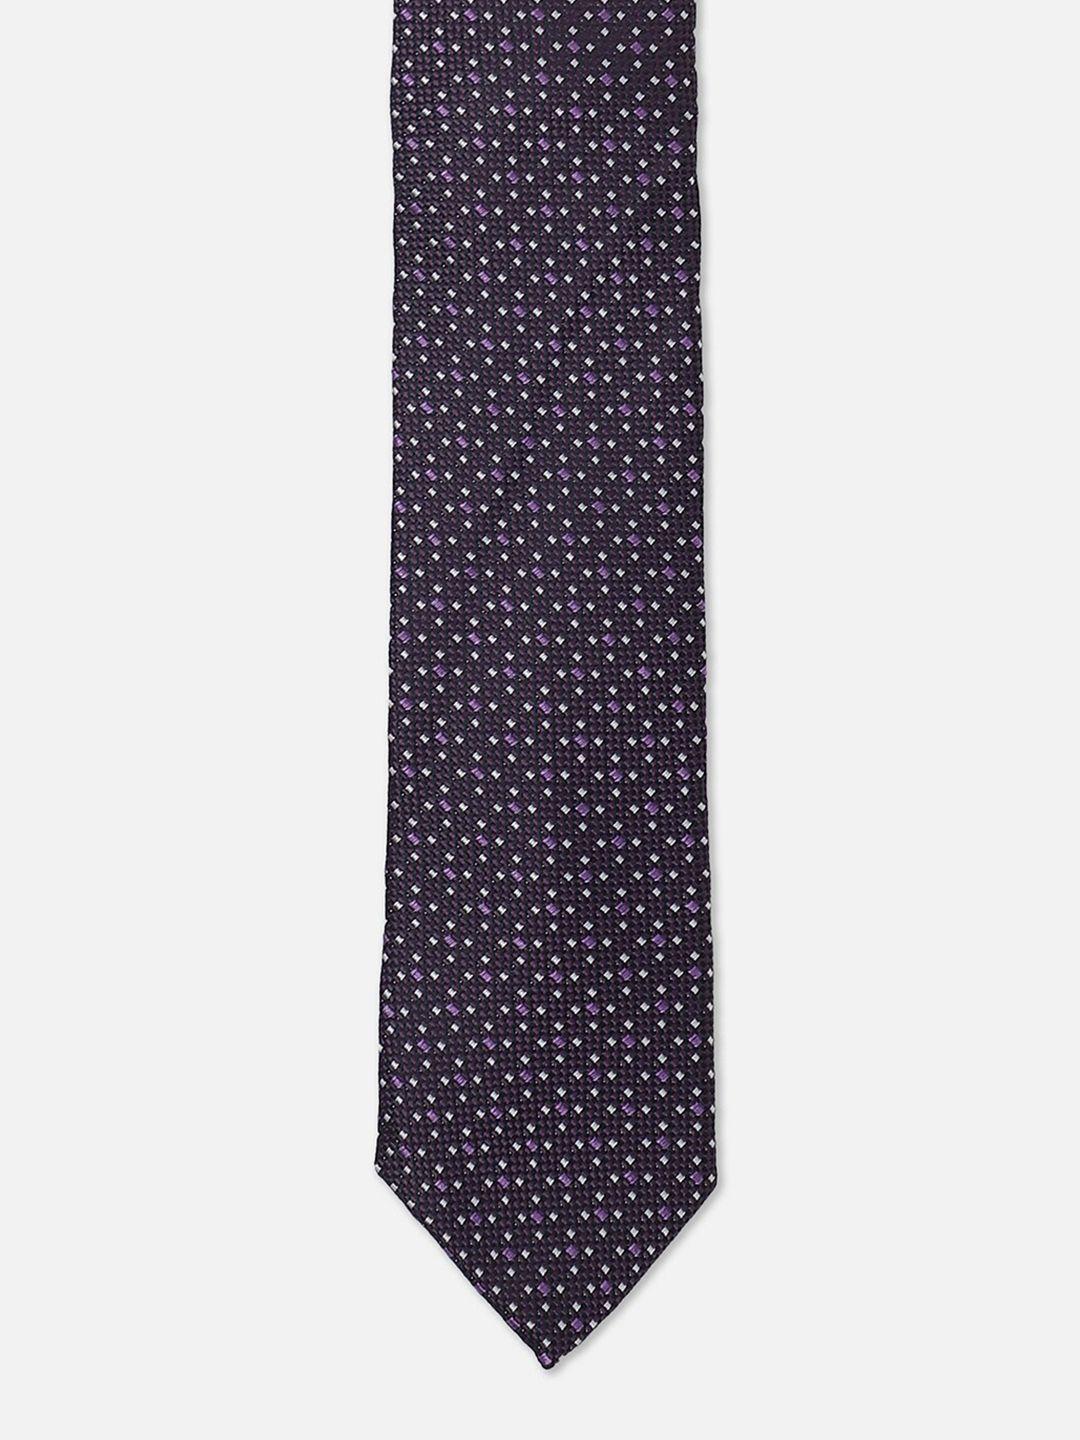 allen solly embroidered formal tie